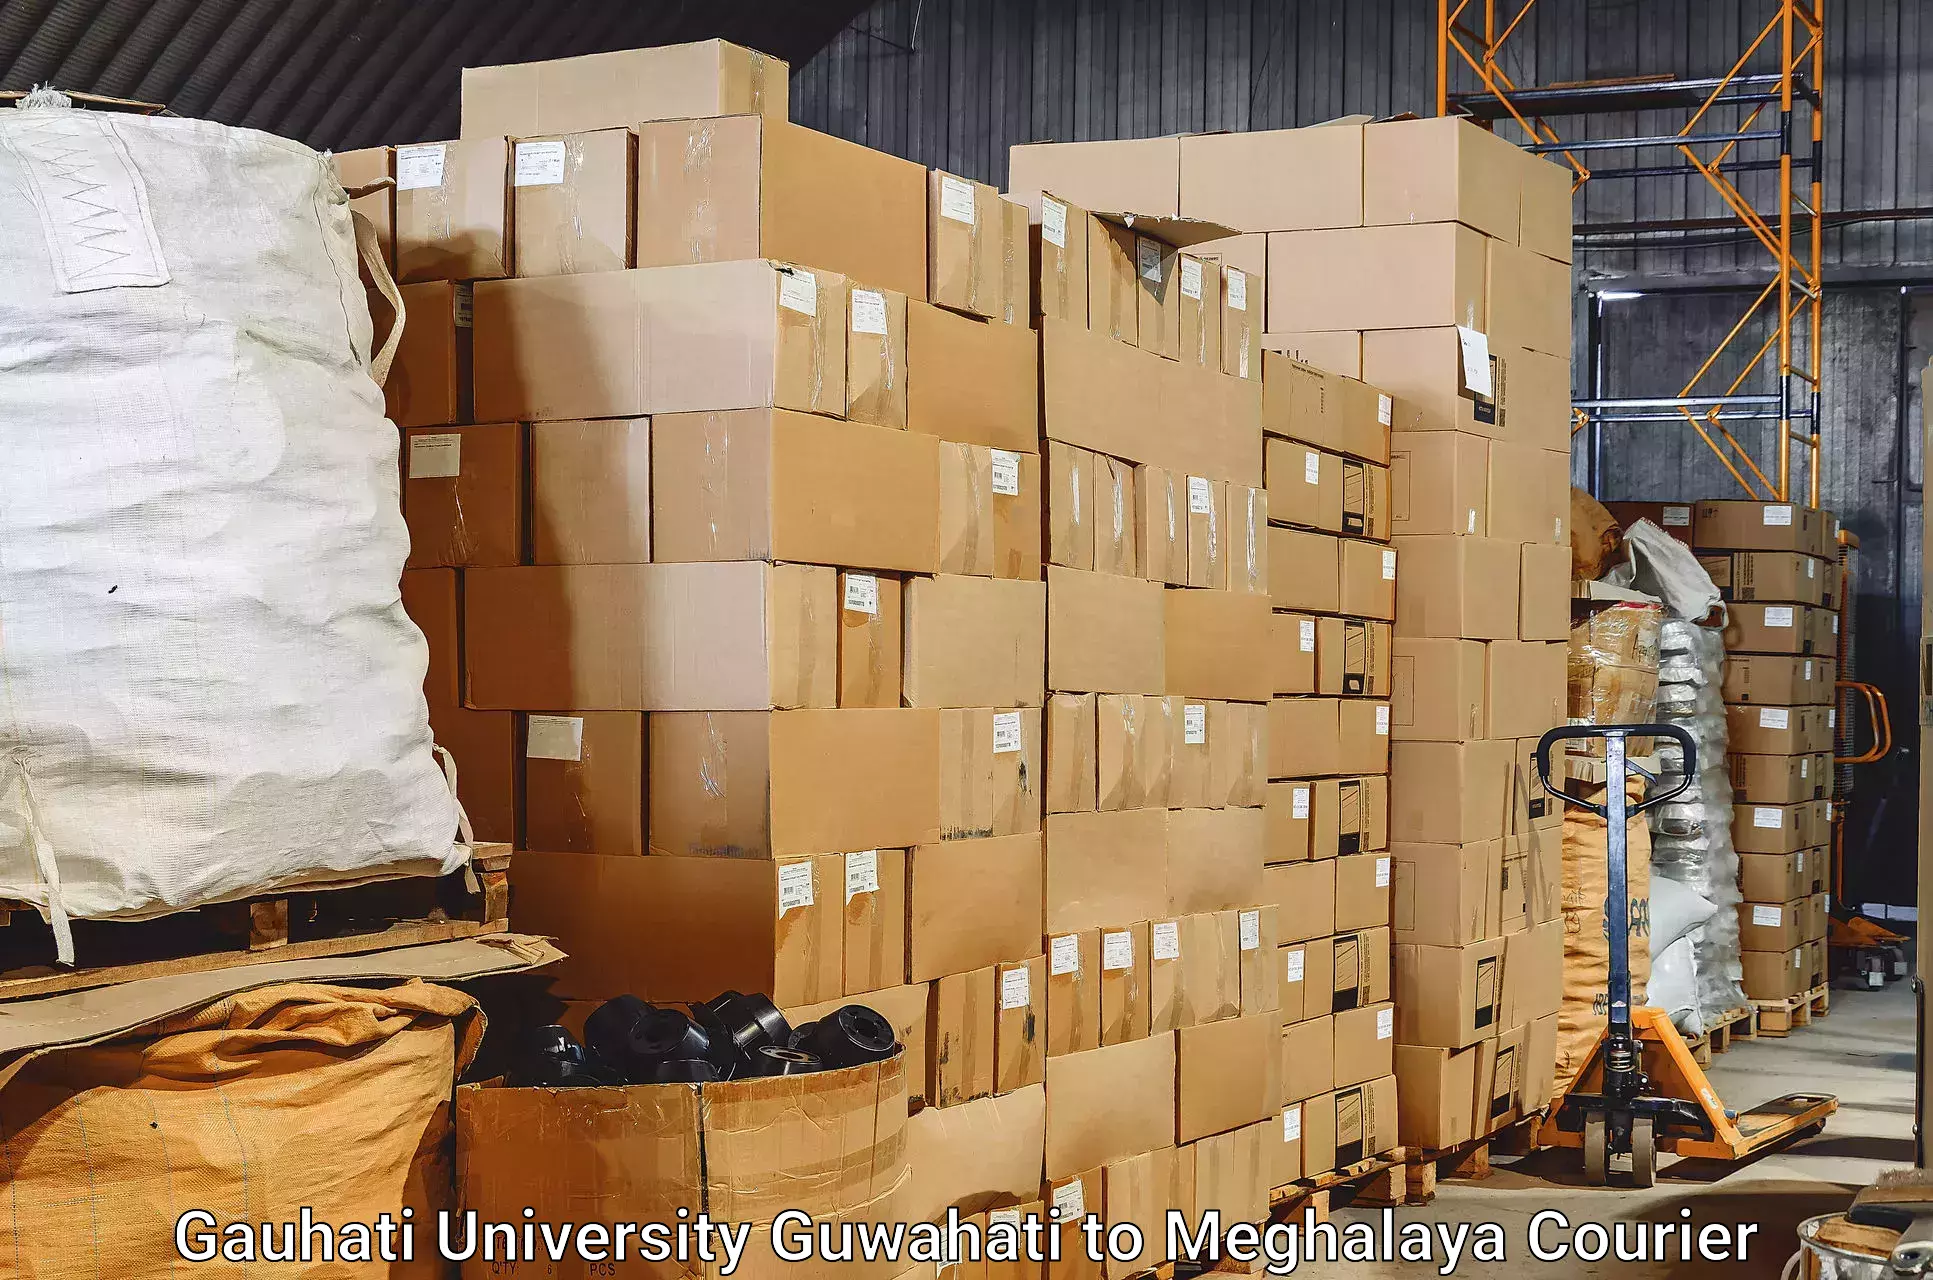 Luggage delivery system in Gauhati University Guwahati to Nongstoin